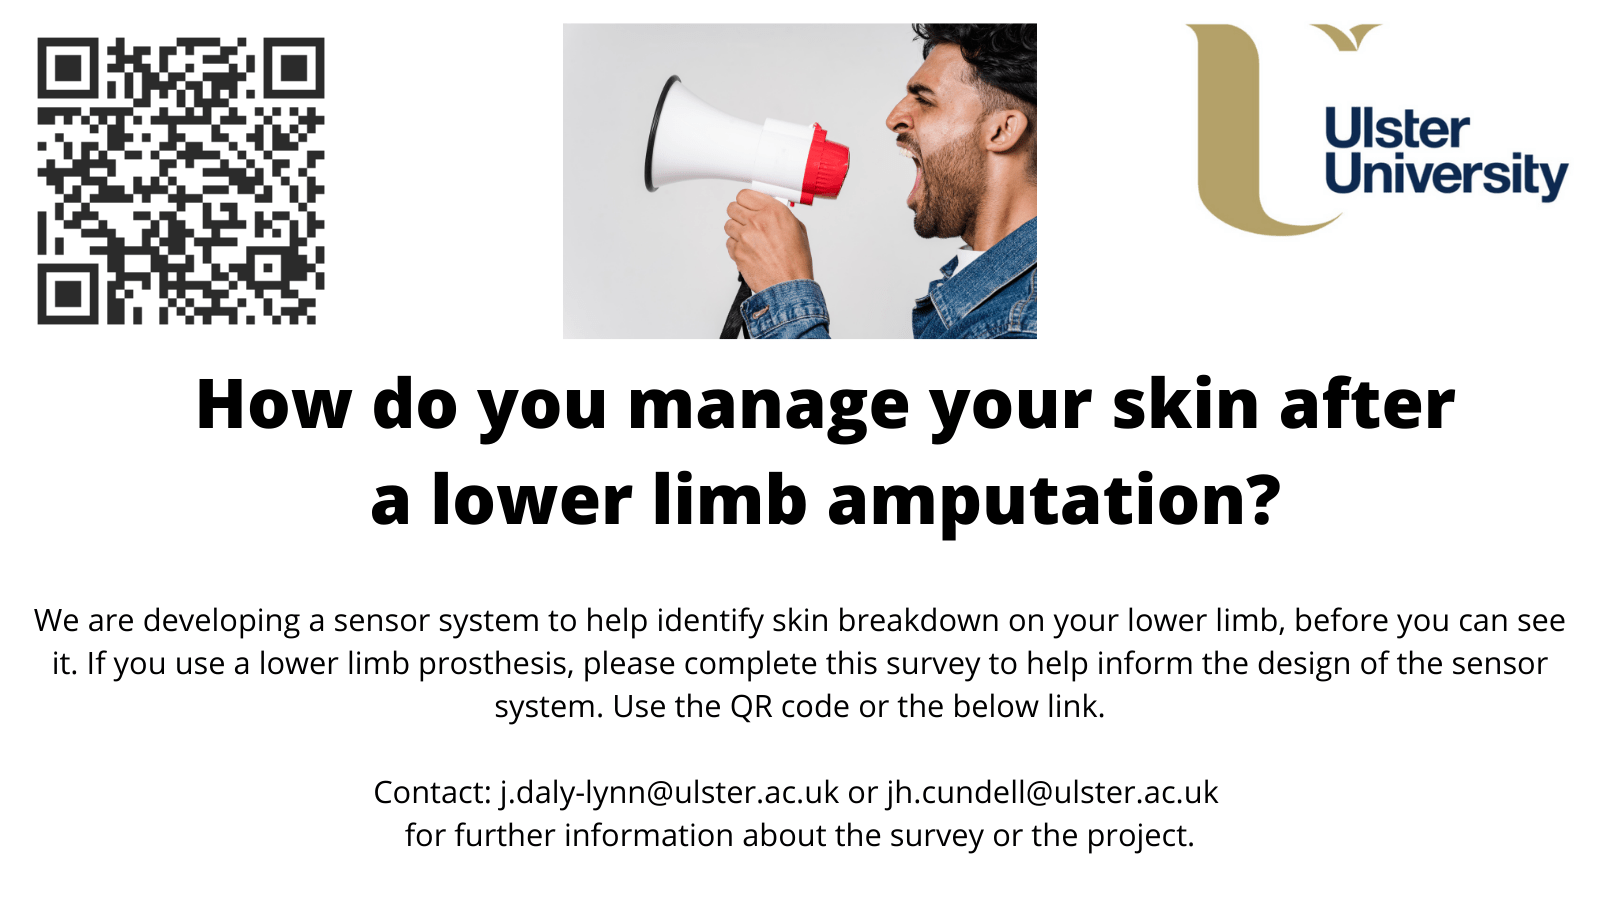 How do you manage your skin after a lower limb amputation